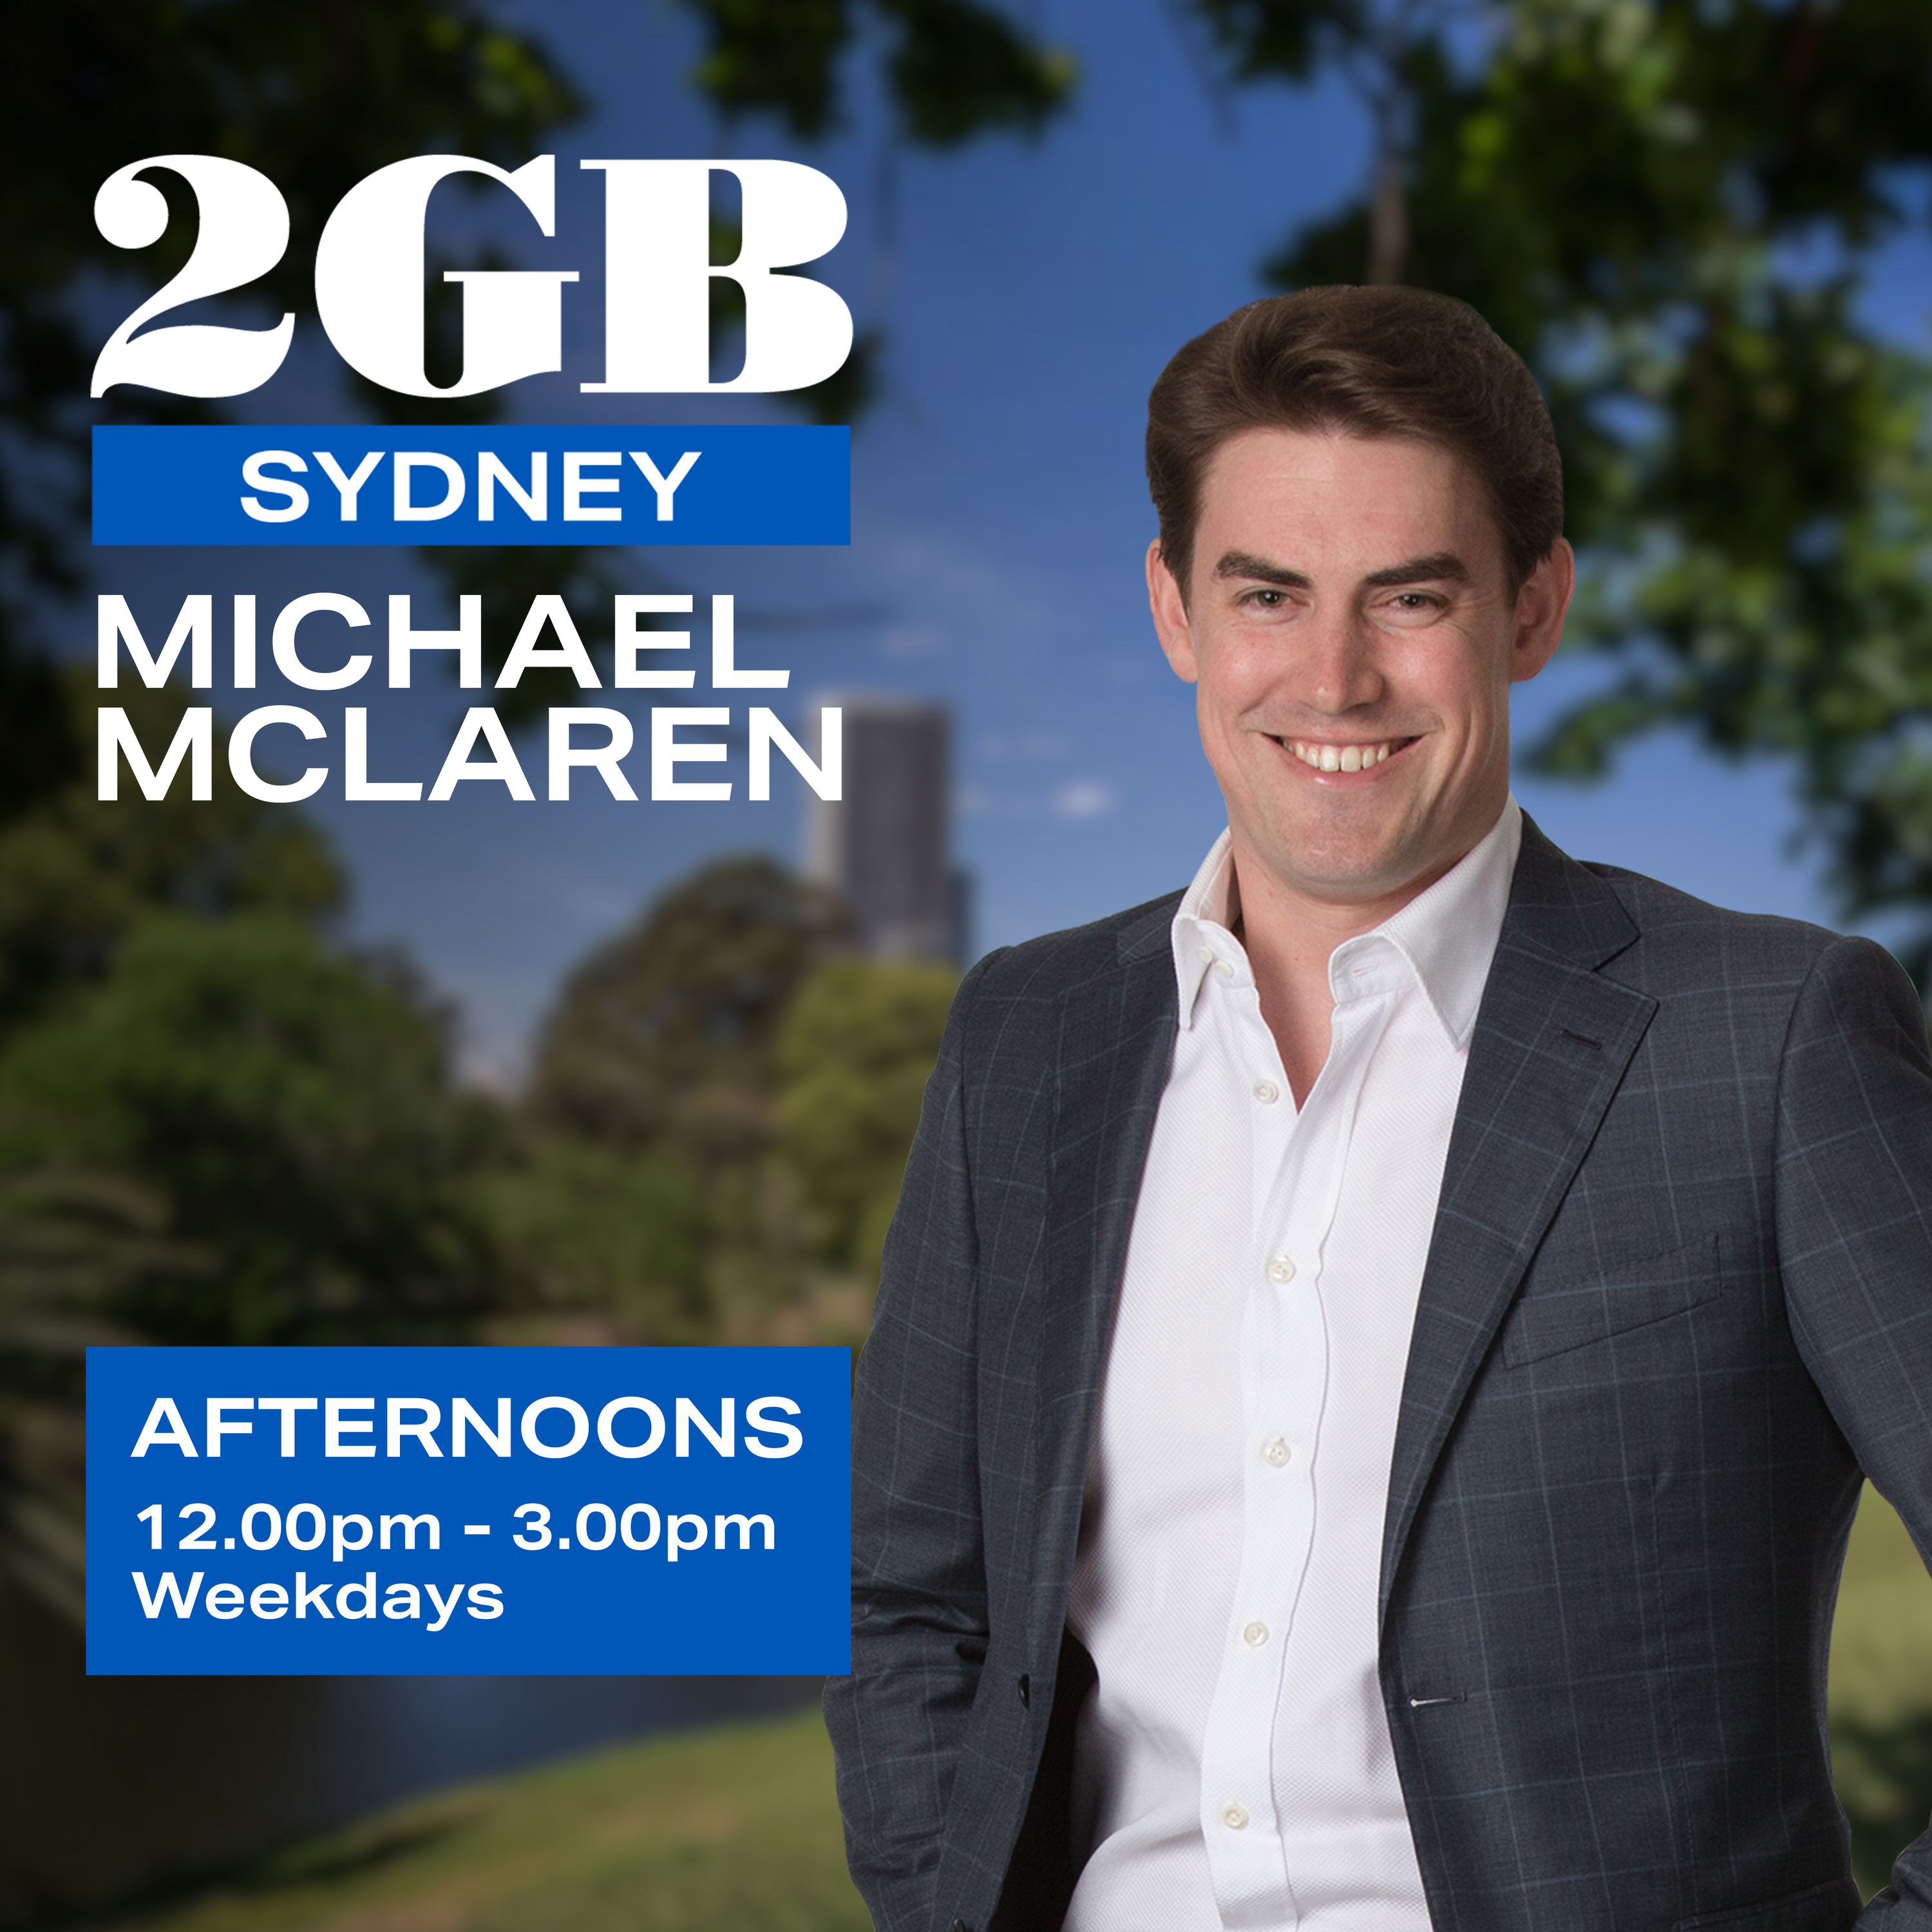 Afternoons with Michael McLaren - Tuesday, 2nd July